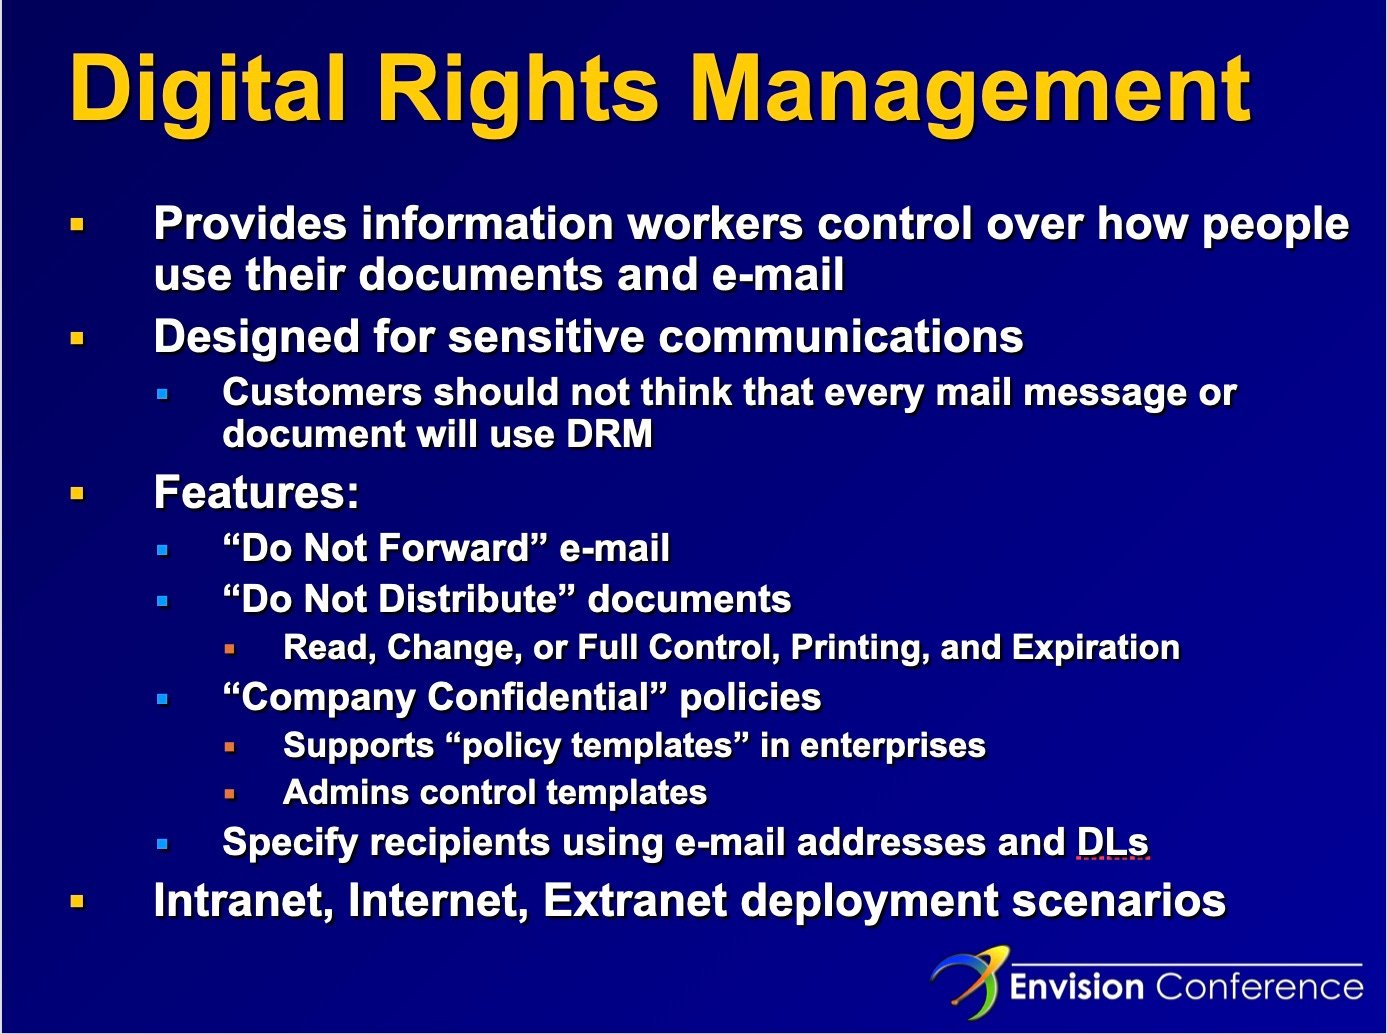 Digital Rights Management Provides information workers control over how people use their documents and e-mail Designed for sensitive communications Customers should not think that every mail message or document will use DRM Features: "Do Not Forward" e-mail "Do Not Distribute" documents Read, Change, or Full Control, Printing, and Expiration "Company Confidential" policies Supports "policy templates" in enterprises Admins control templates Specify recipients using e-mail addresses and DLs Intranet, Internet, Extranet deployment scenarios